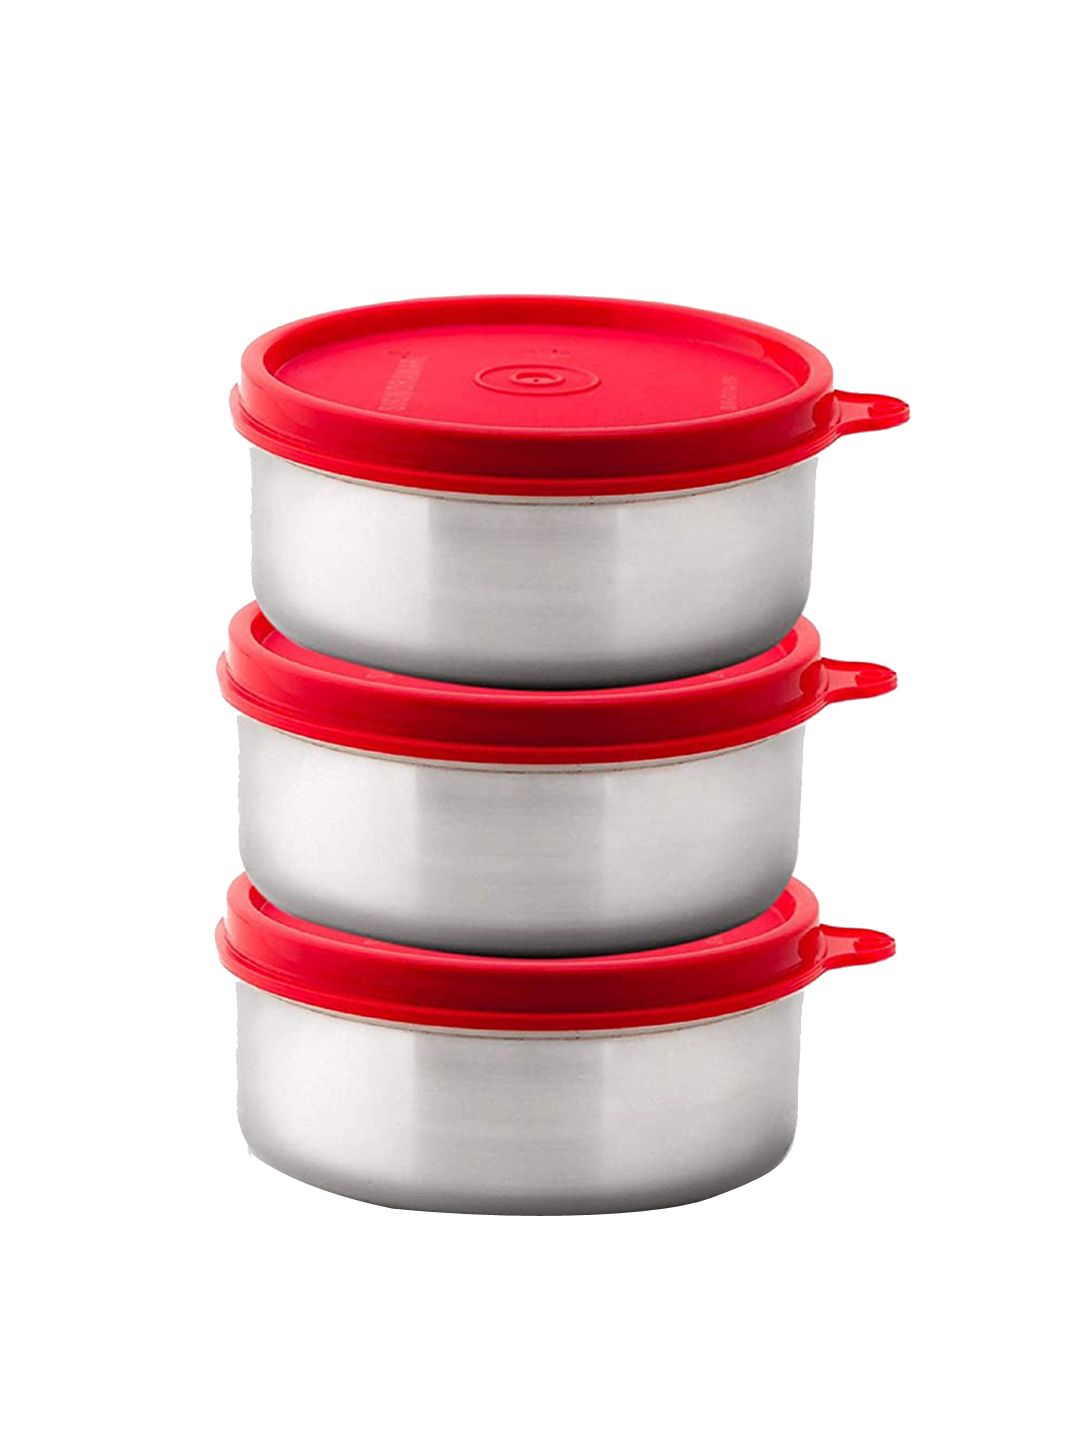 SignoraWare Set of 3 Red Steel Food Container Price in India